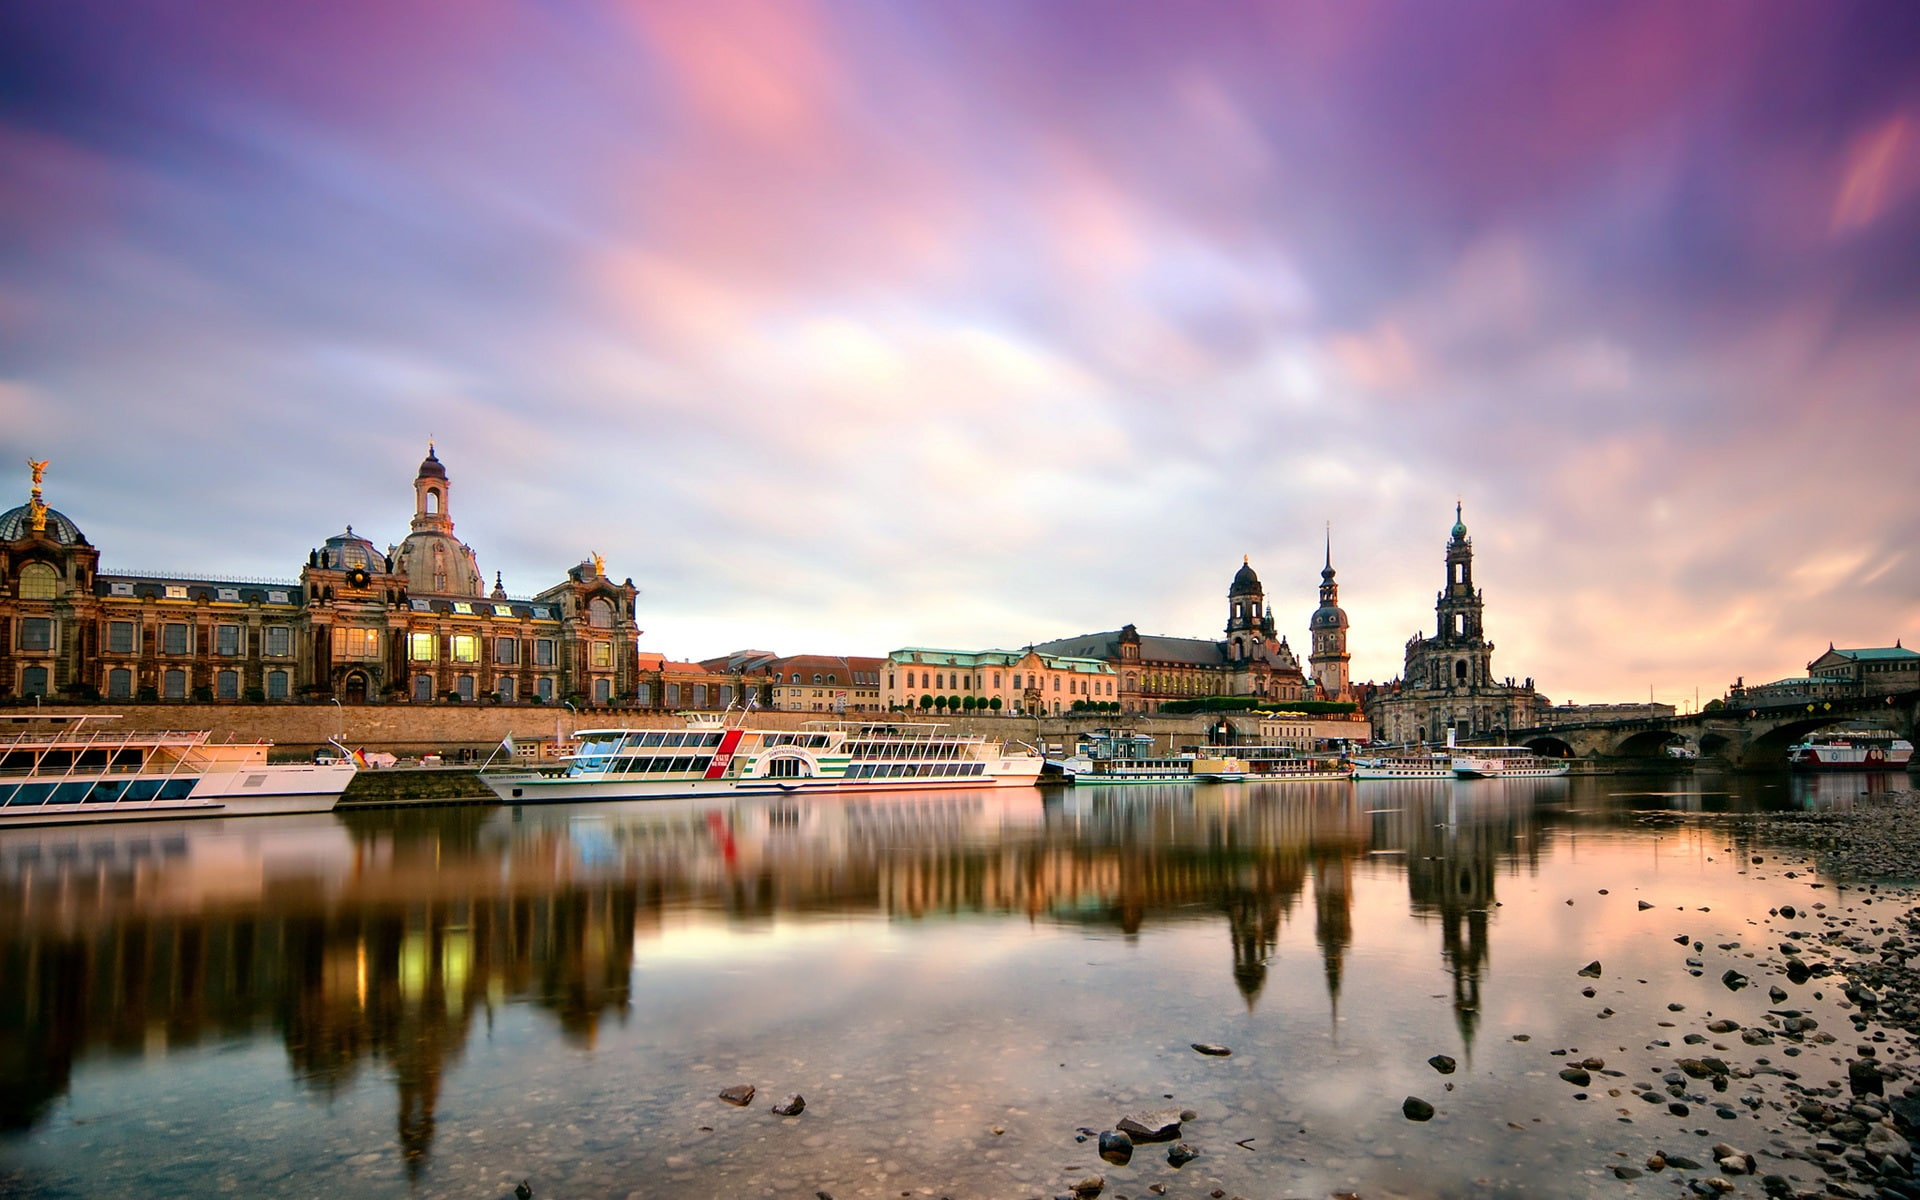 Dresden, Germany, morning, city, buildings, harbor, boats, Elbe river, brown painted concrete building